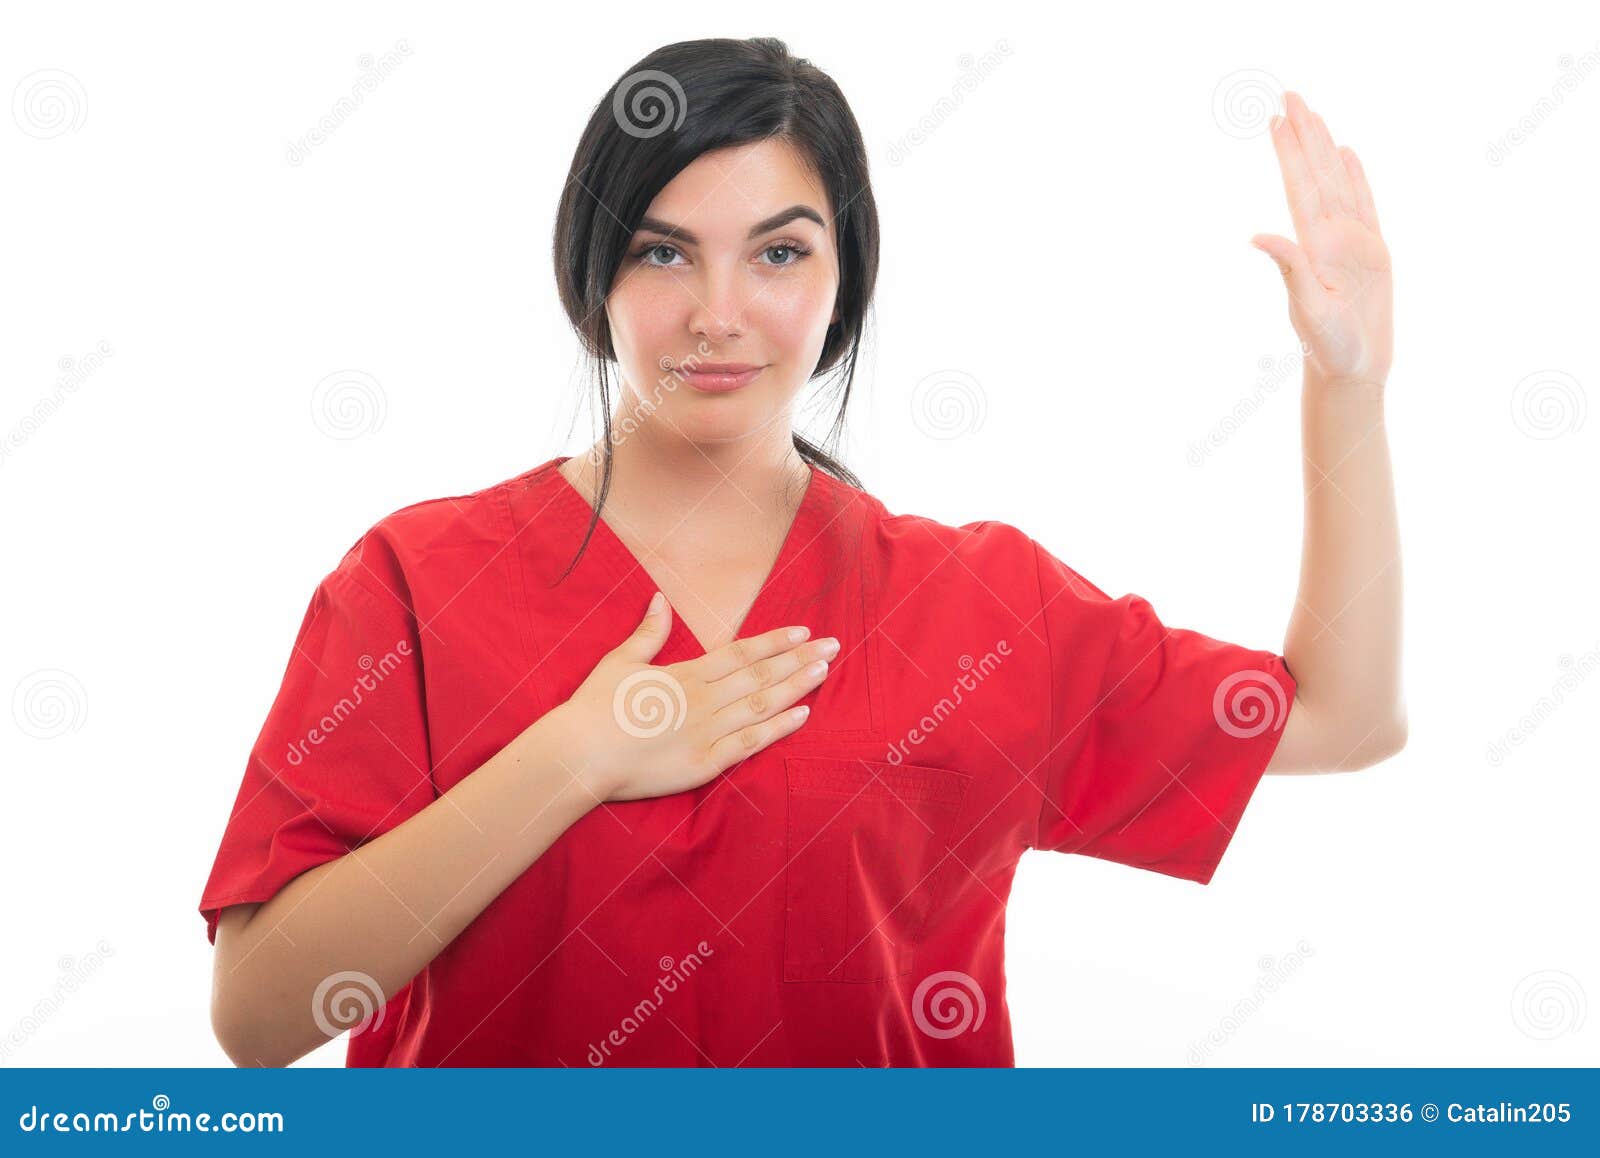 Attractive Young Female Doctor Nurse Taking Stock Photo 